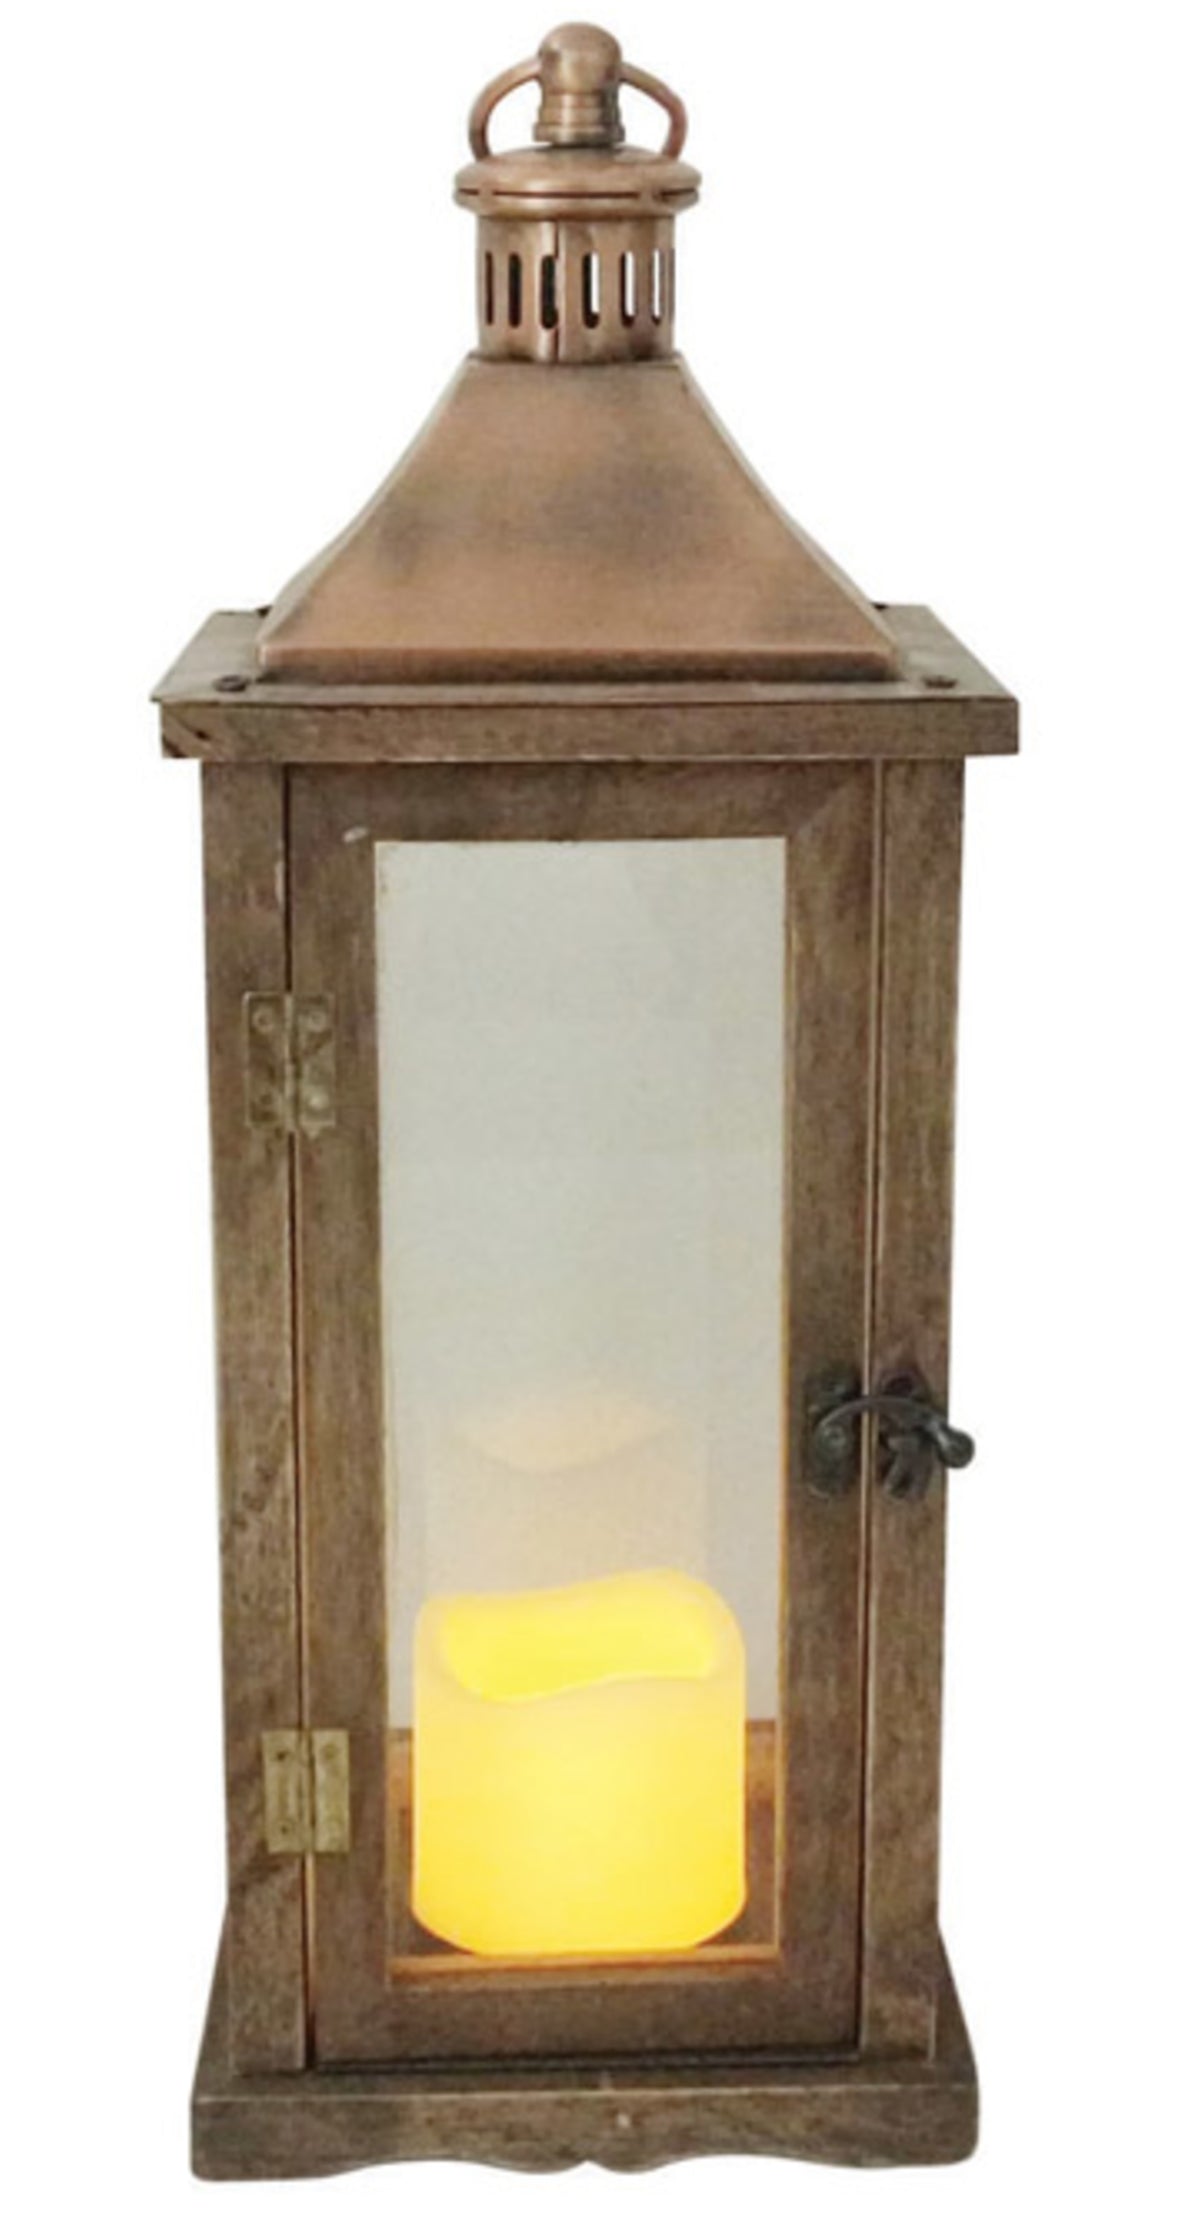 Celebrations SGW4903 LED Candle Christmas Lantern, Brown